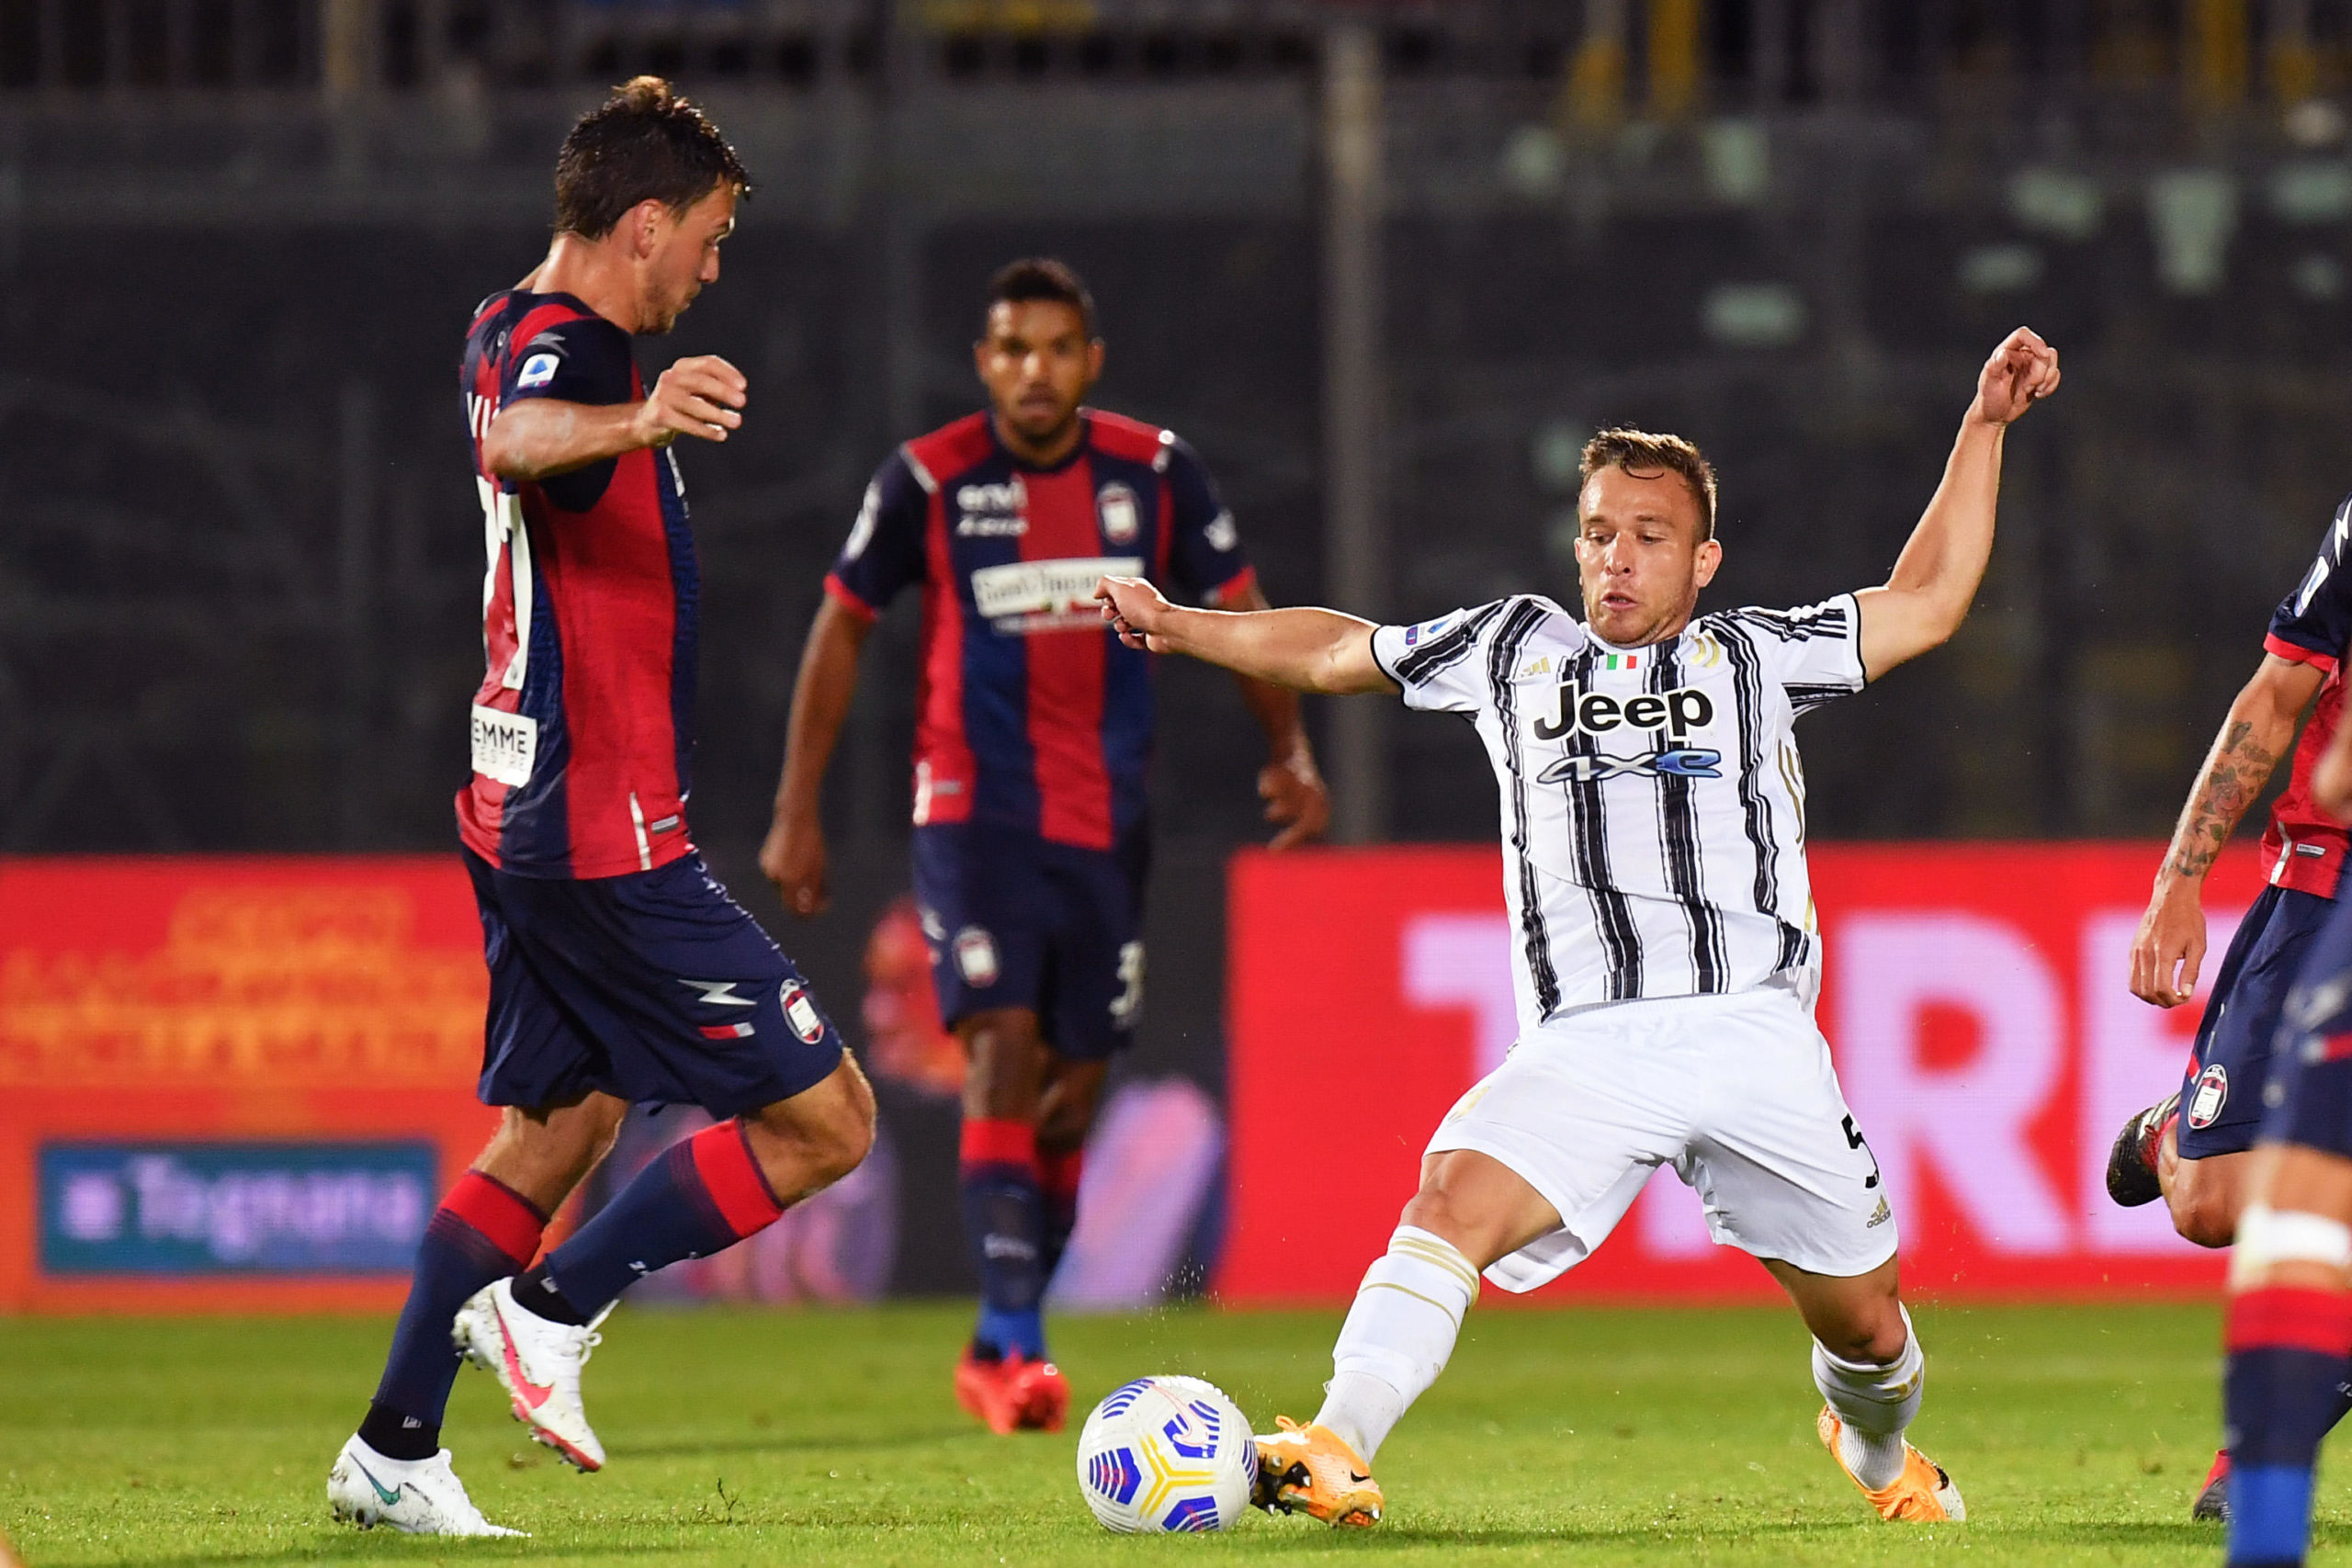 Arthur in action for Juventus against Crotone